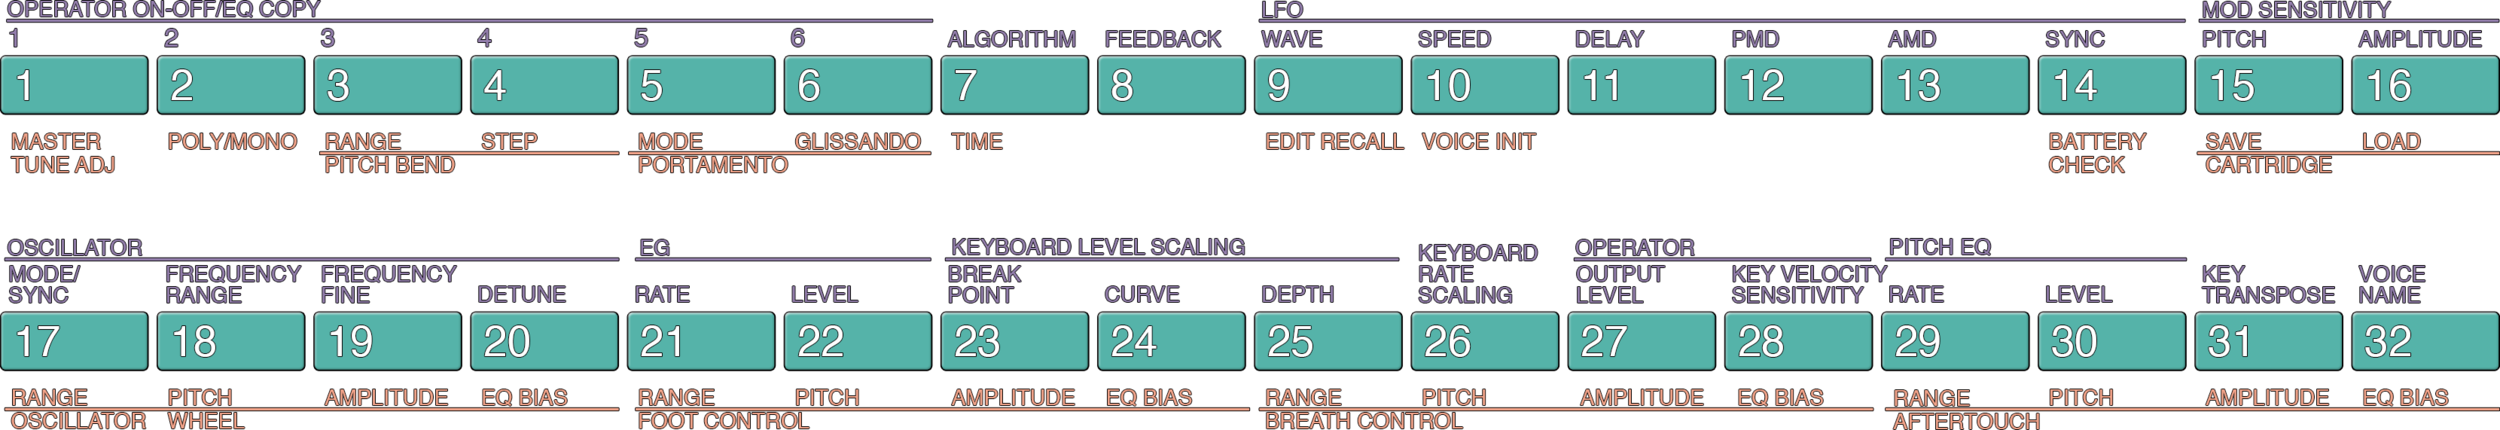 DX7-graphic2-smaller.png